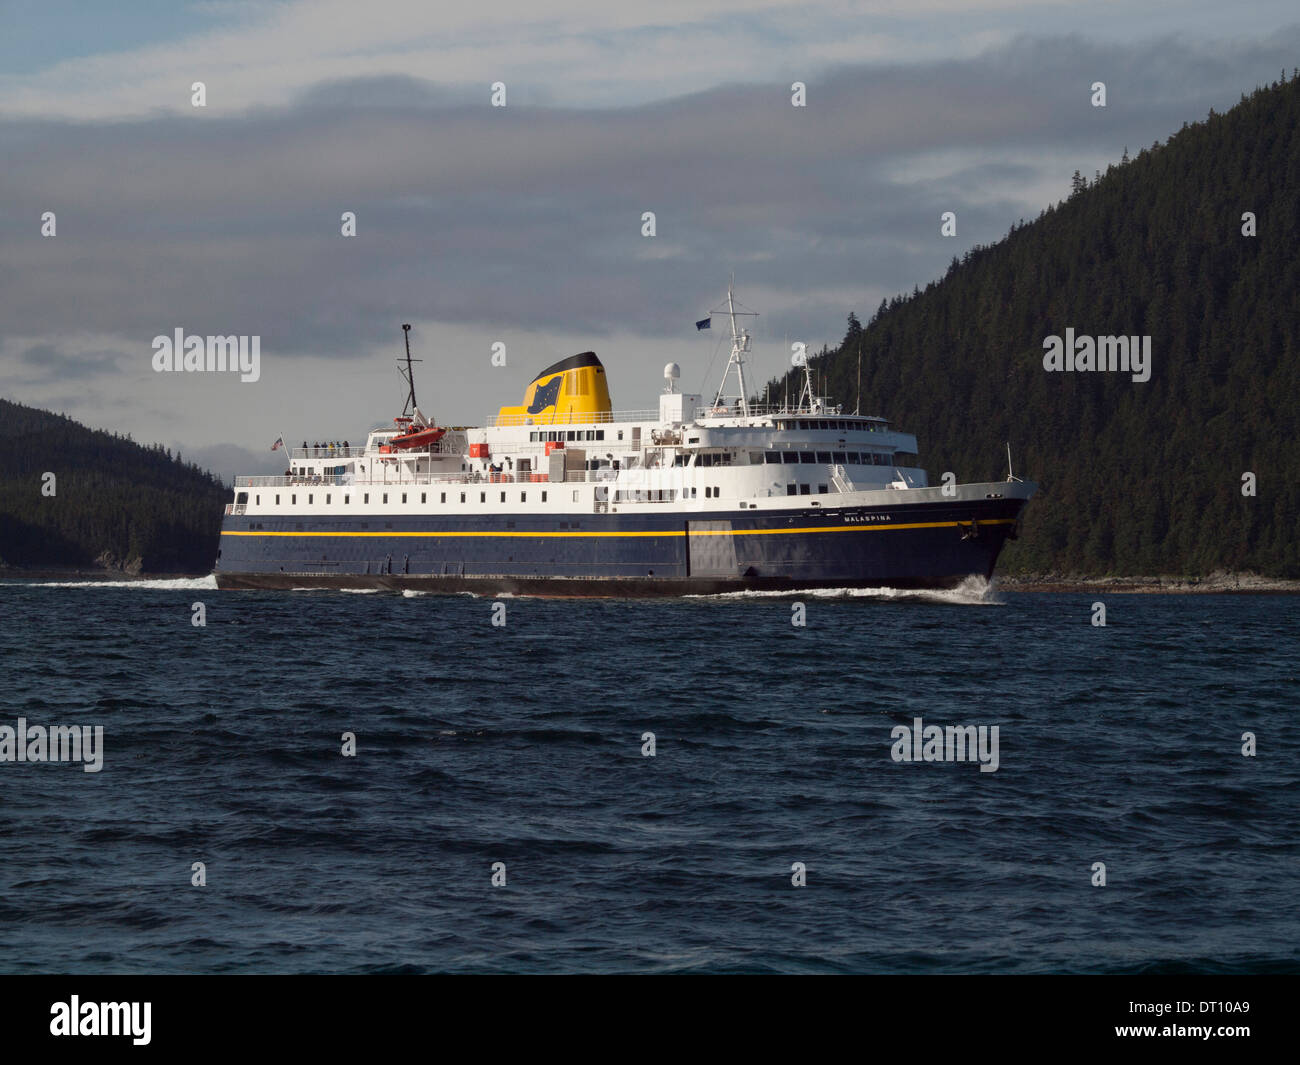 M/V Malaspina of the Alaska Marine Highway System celebrates 50 years with yellow funnel Stock Photo